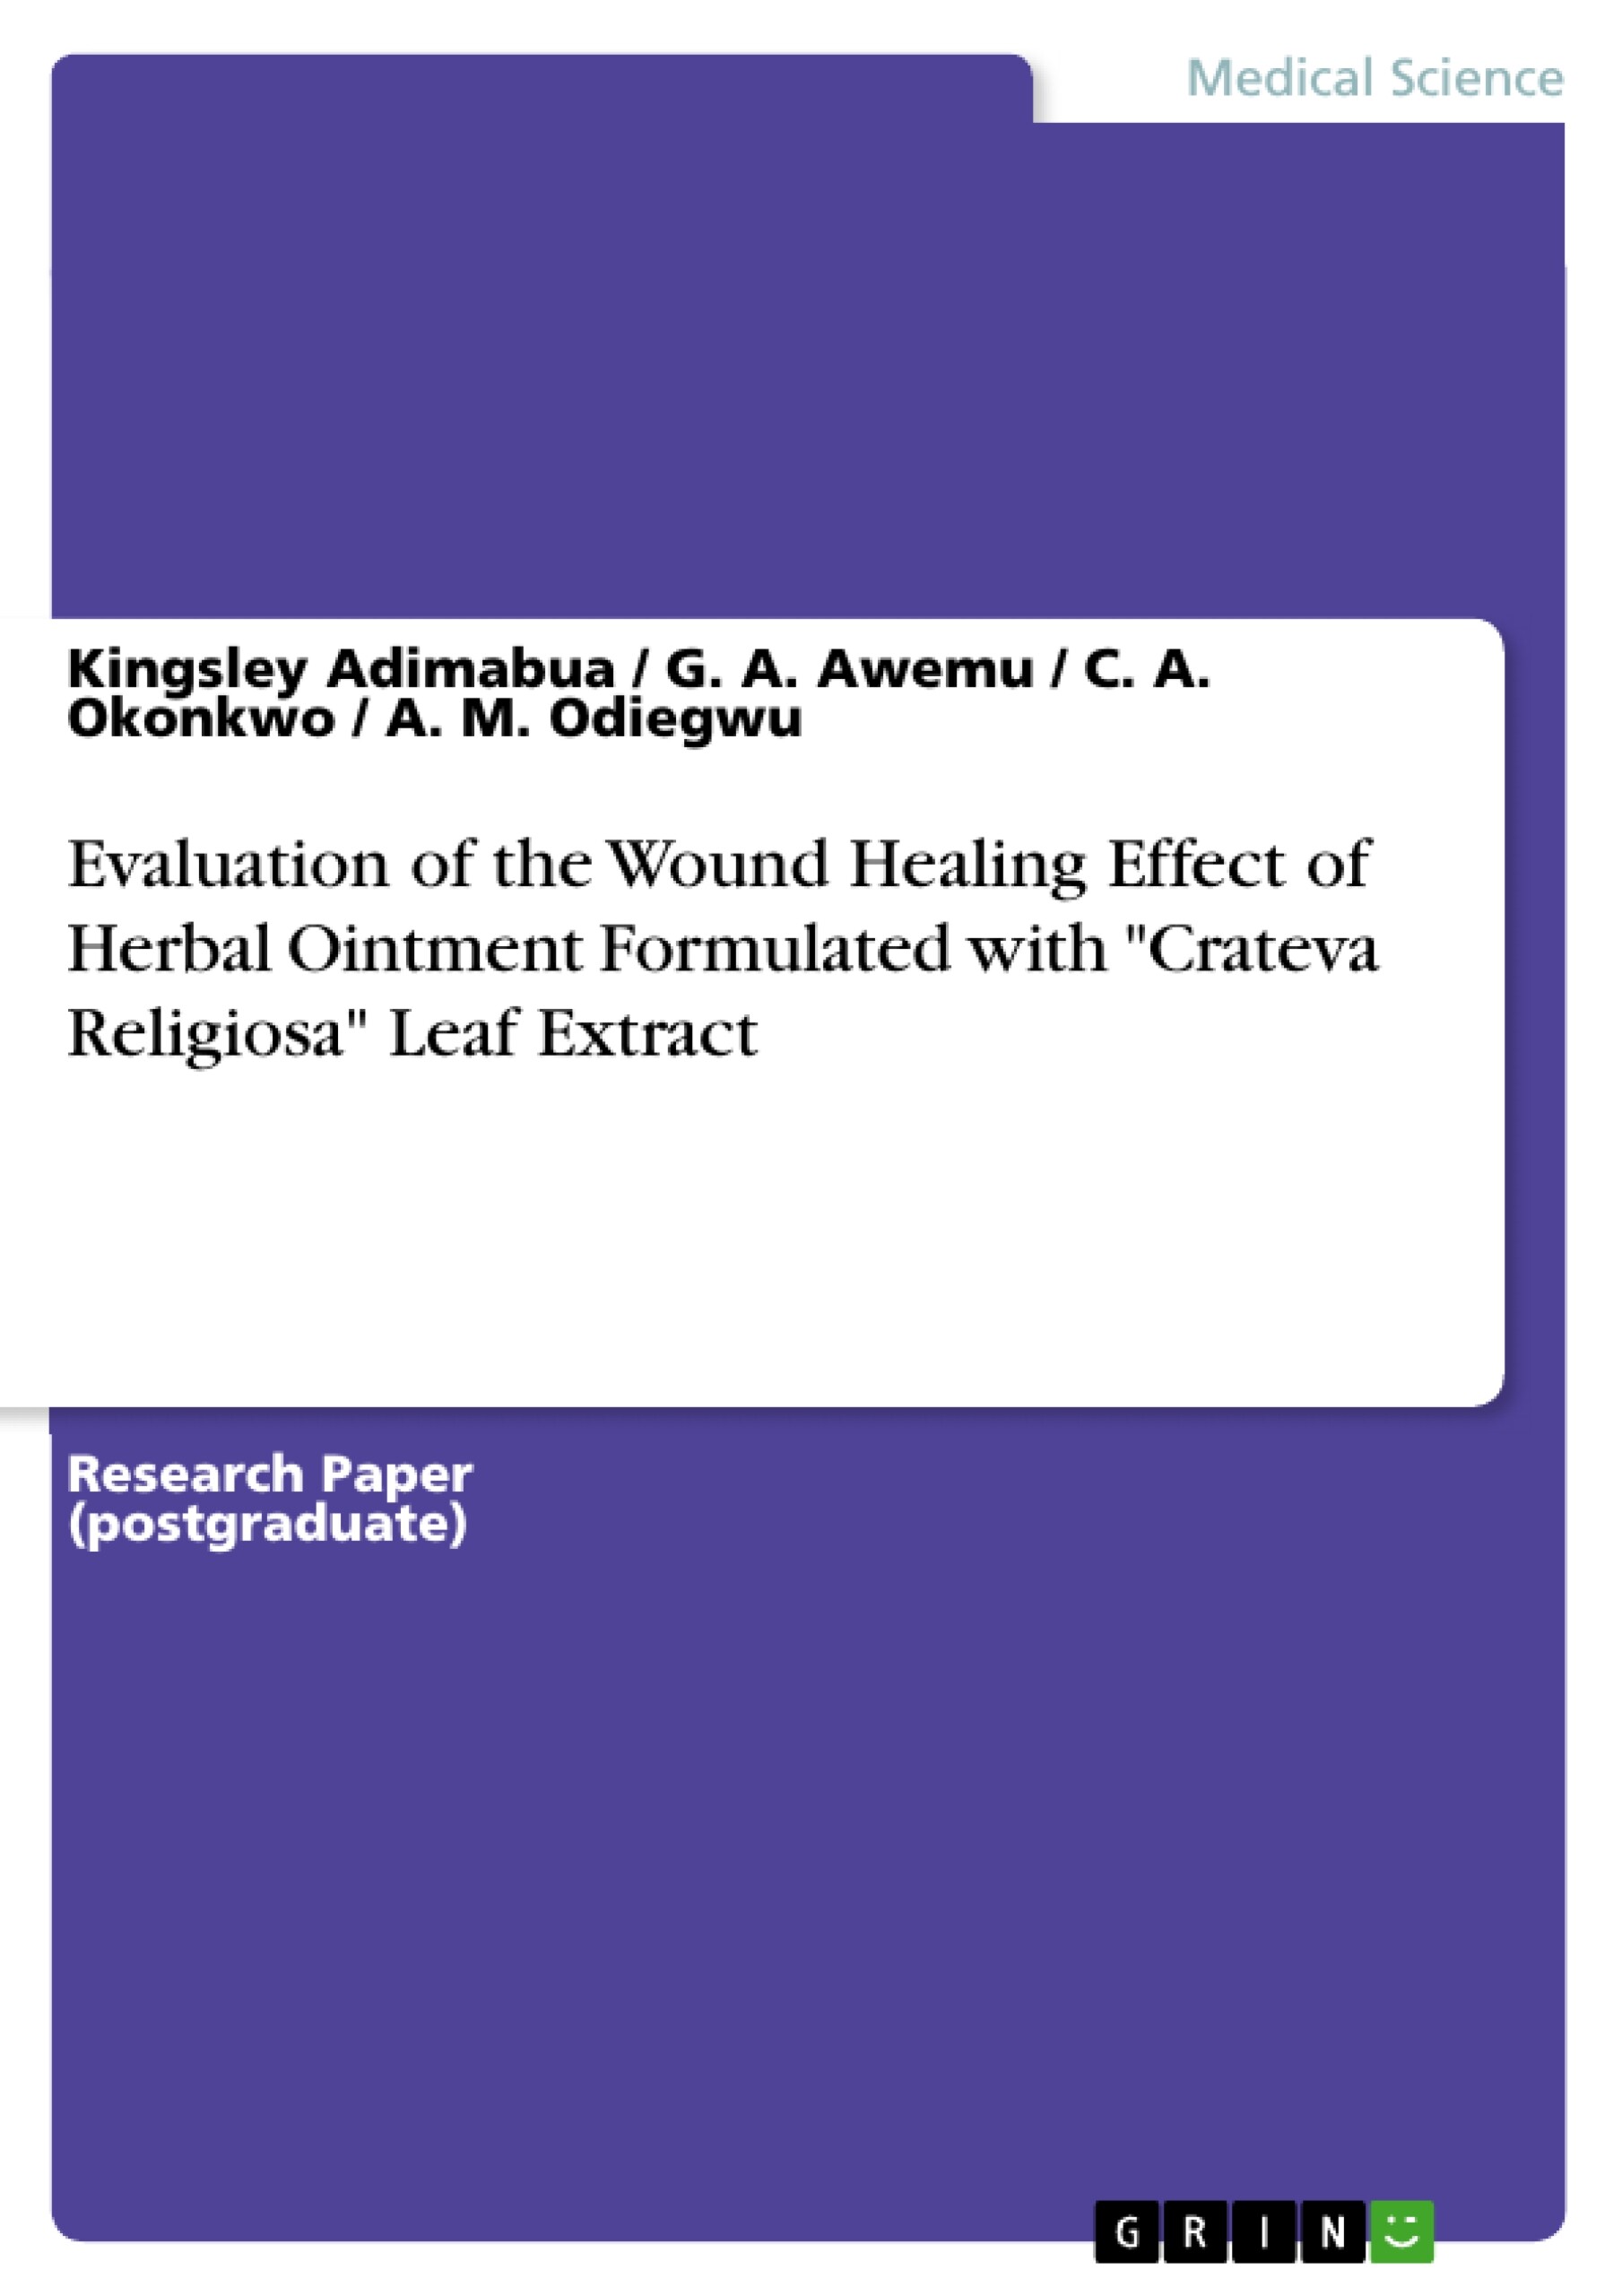 Evaluation of the Wound Healing Effect of Herbal Ointment Formulated with 'Crateva Religiosa' Leaf Extract